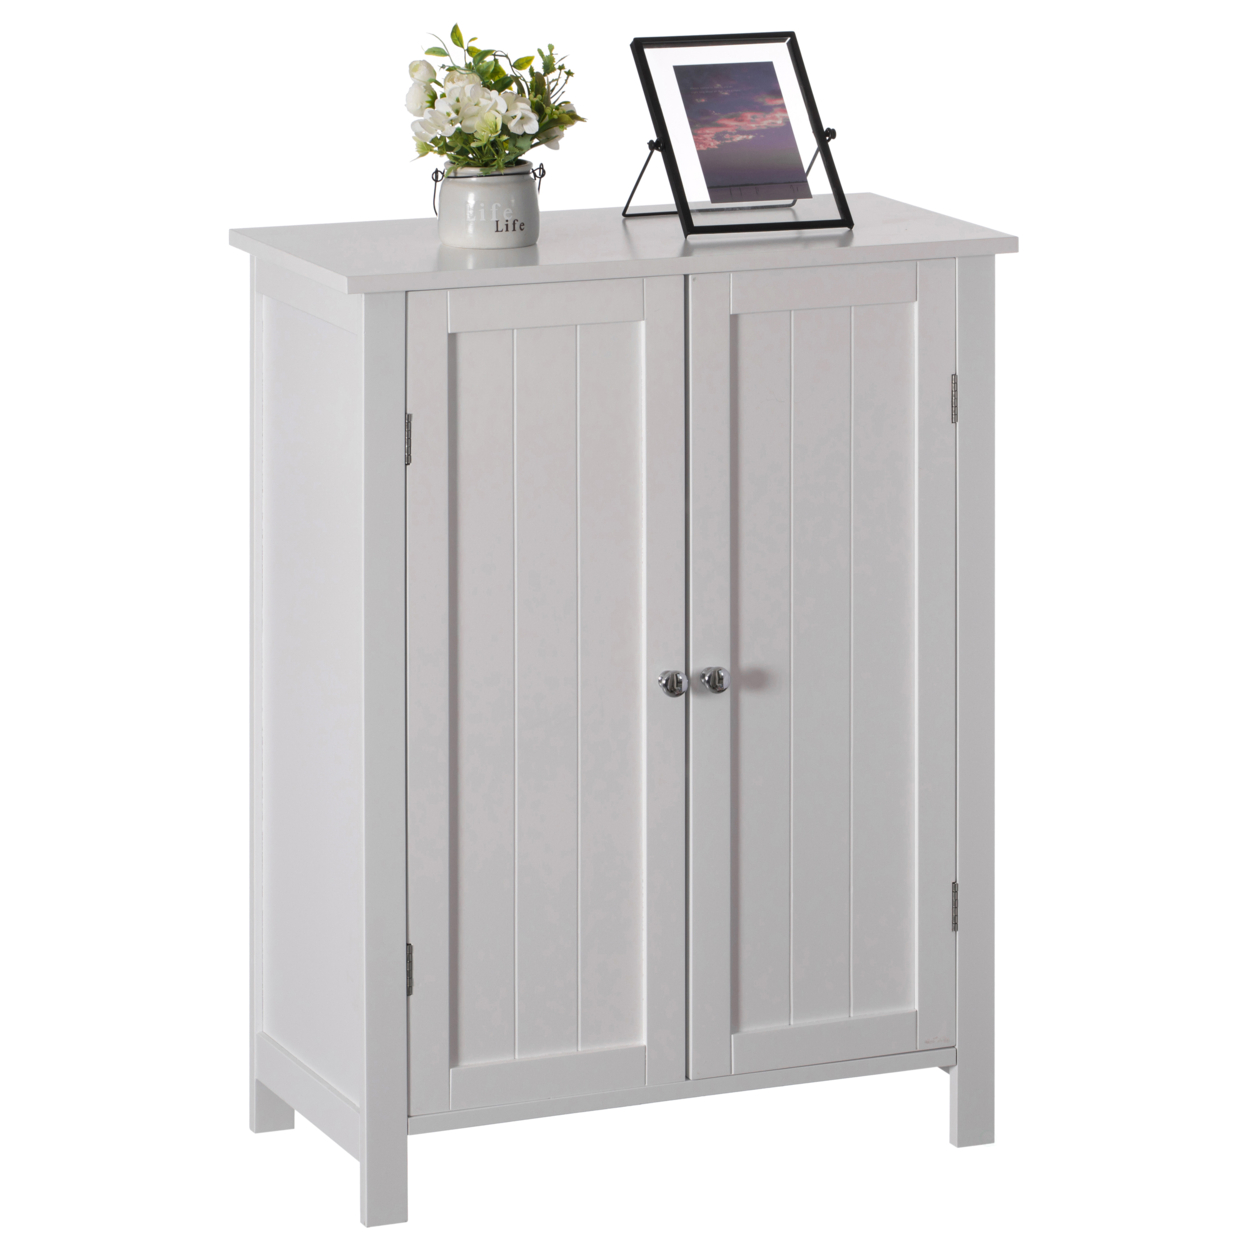 White Wooden Bathroom Cabinet with Double Doors and Adjustable Shelves Modern Vanity Storage